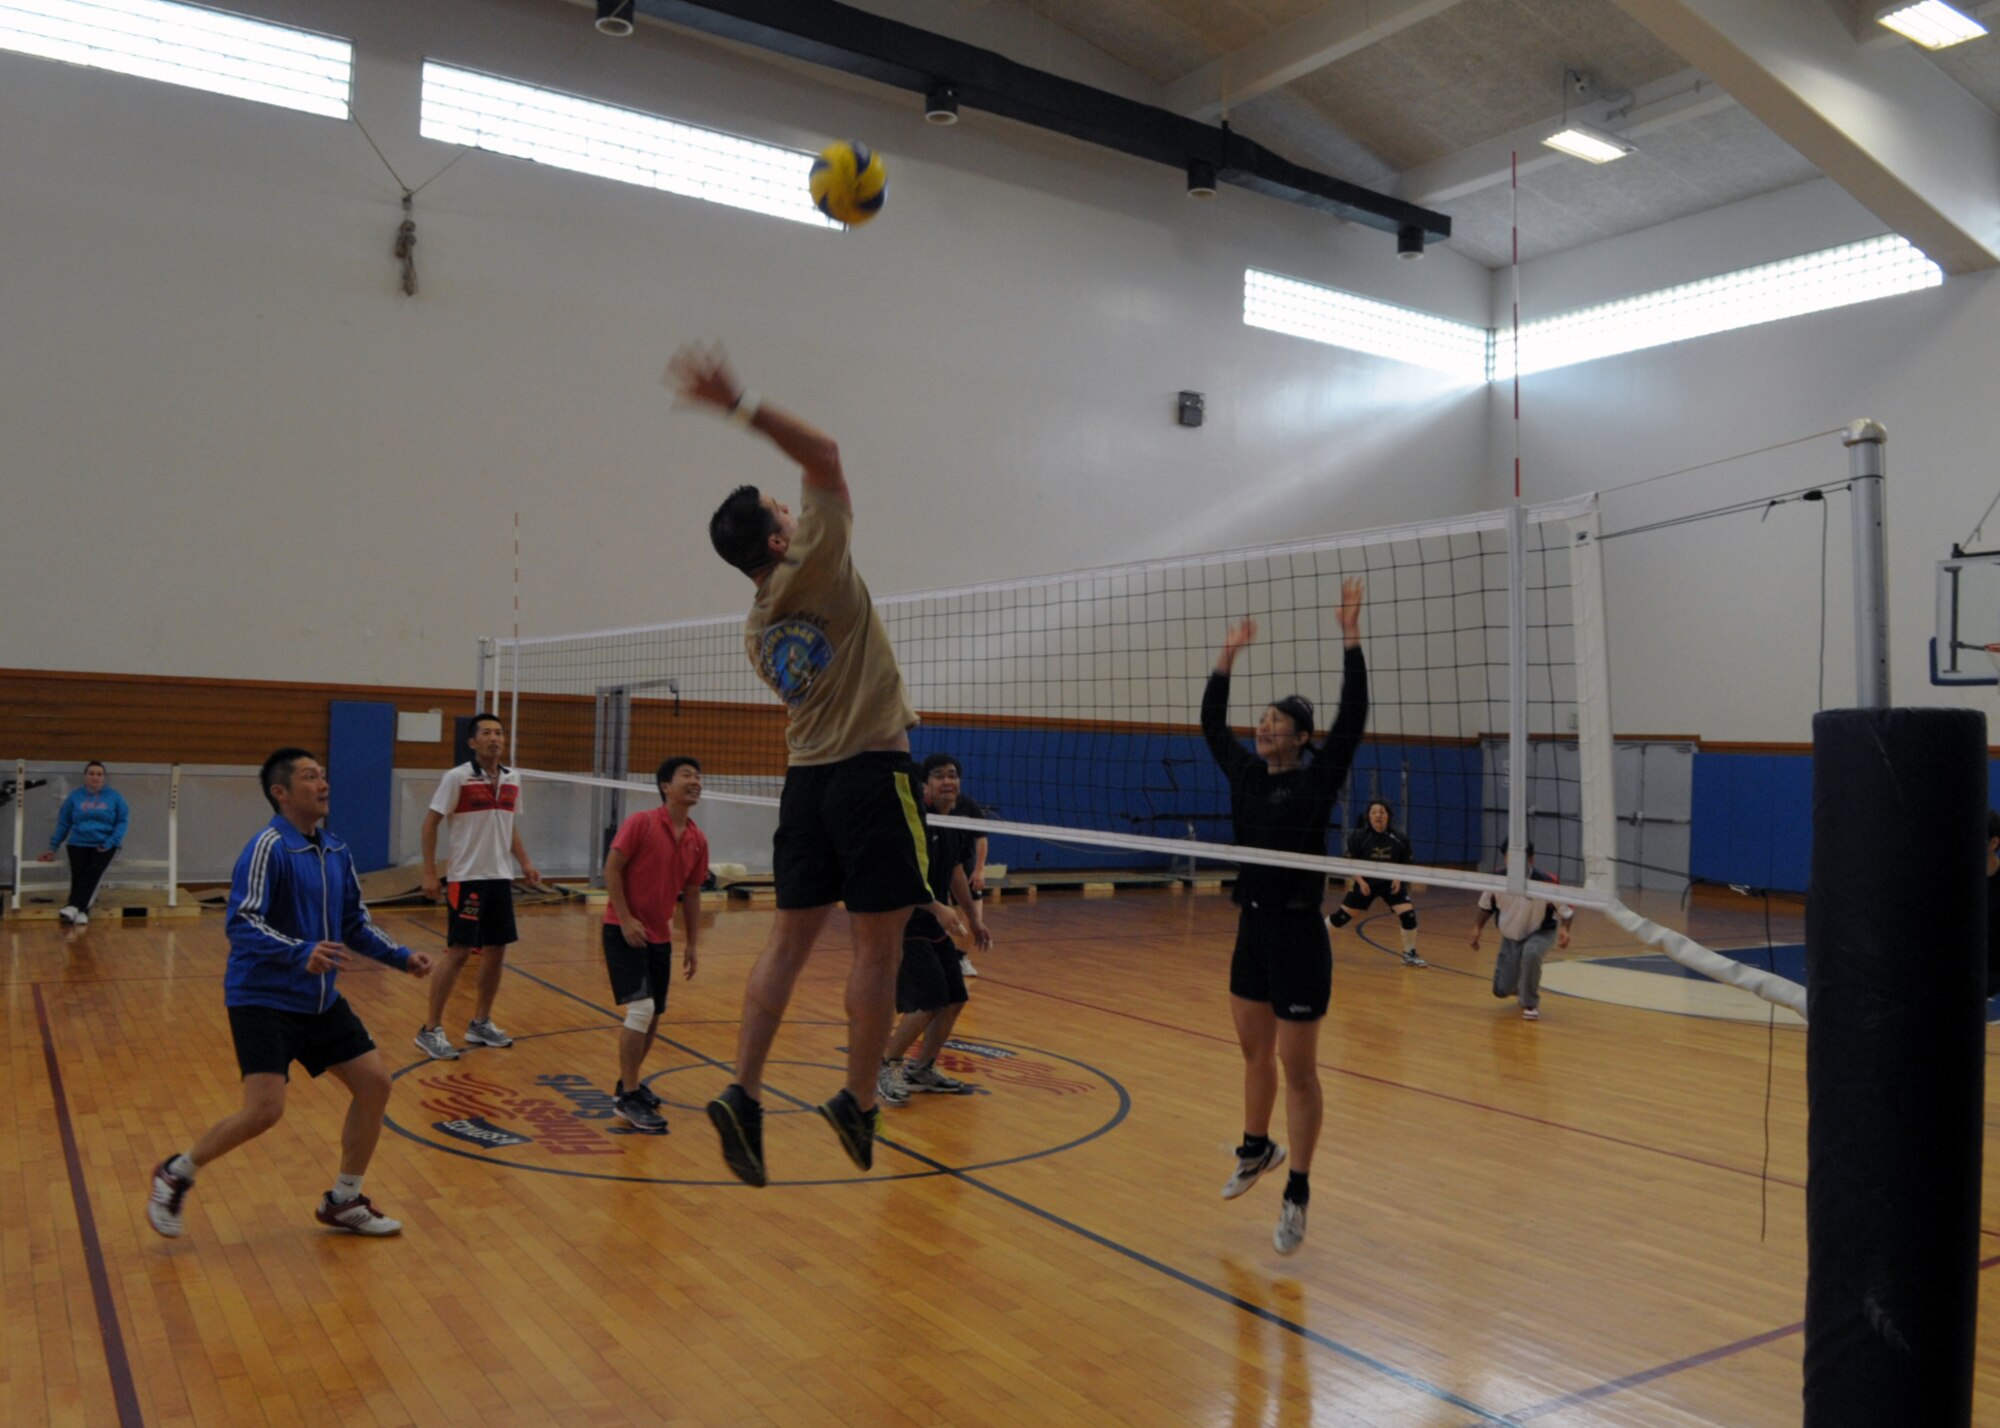 Adam Bearden soars for a spike during an invitational volleyball tournament Feb. 28, 2015, at Kadena Air Base, Japan. Members of the Company Grade Officer Council and Airmen Committed to Excellence invited two Japanese teams to the base for a day of sportsmanship and camaraderie, and Bearden played with the Japan Air Self-Defense team from Naha Air Base during one of the games. (U.S. Air Force photo by Tim Flack)